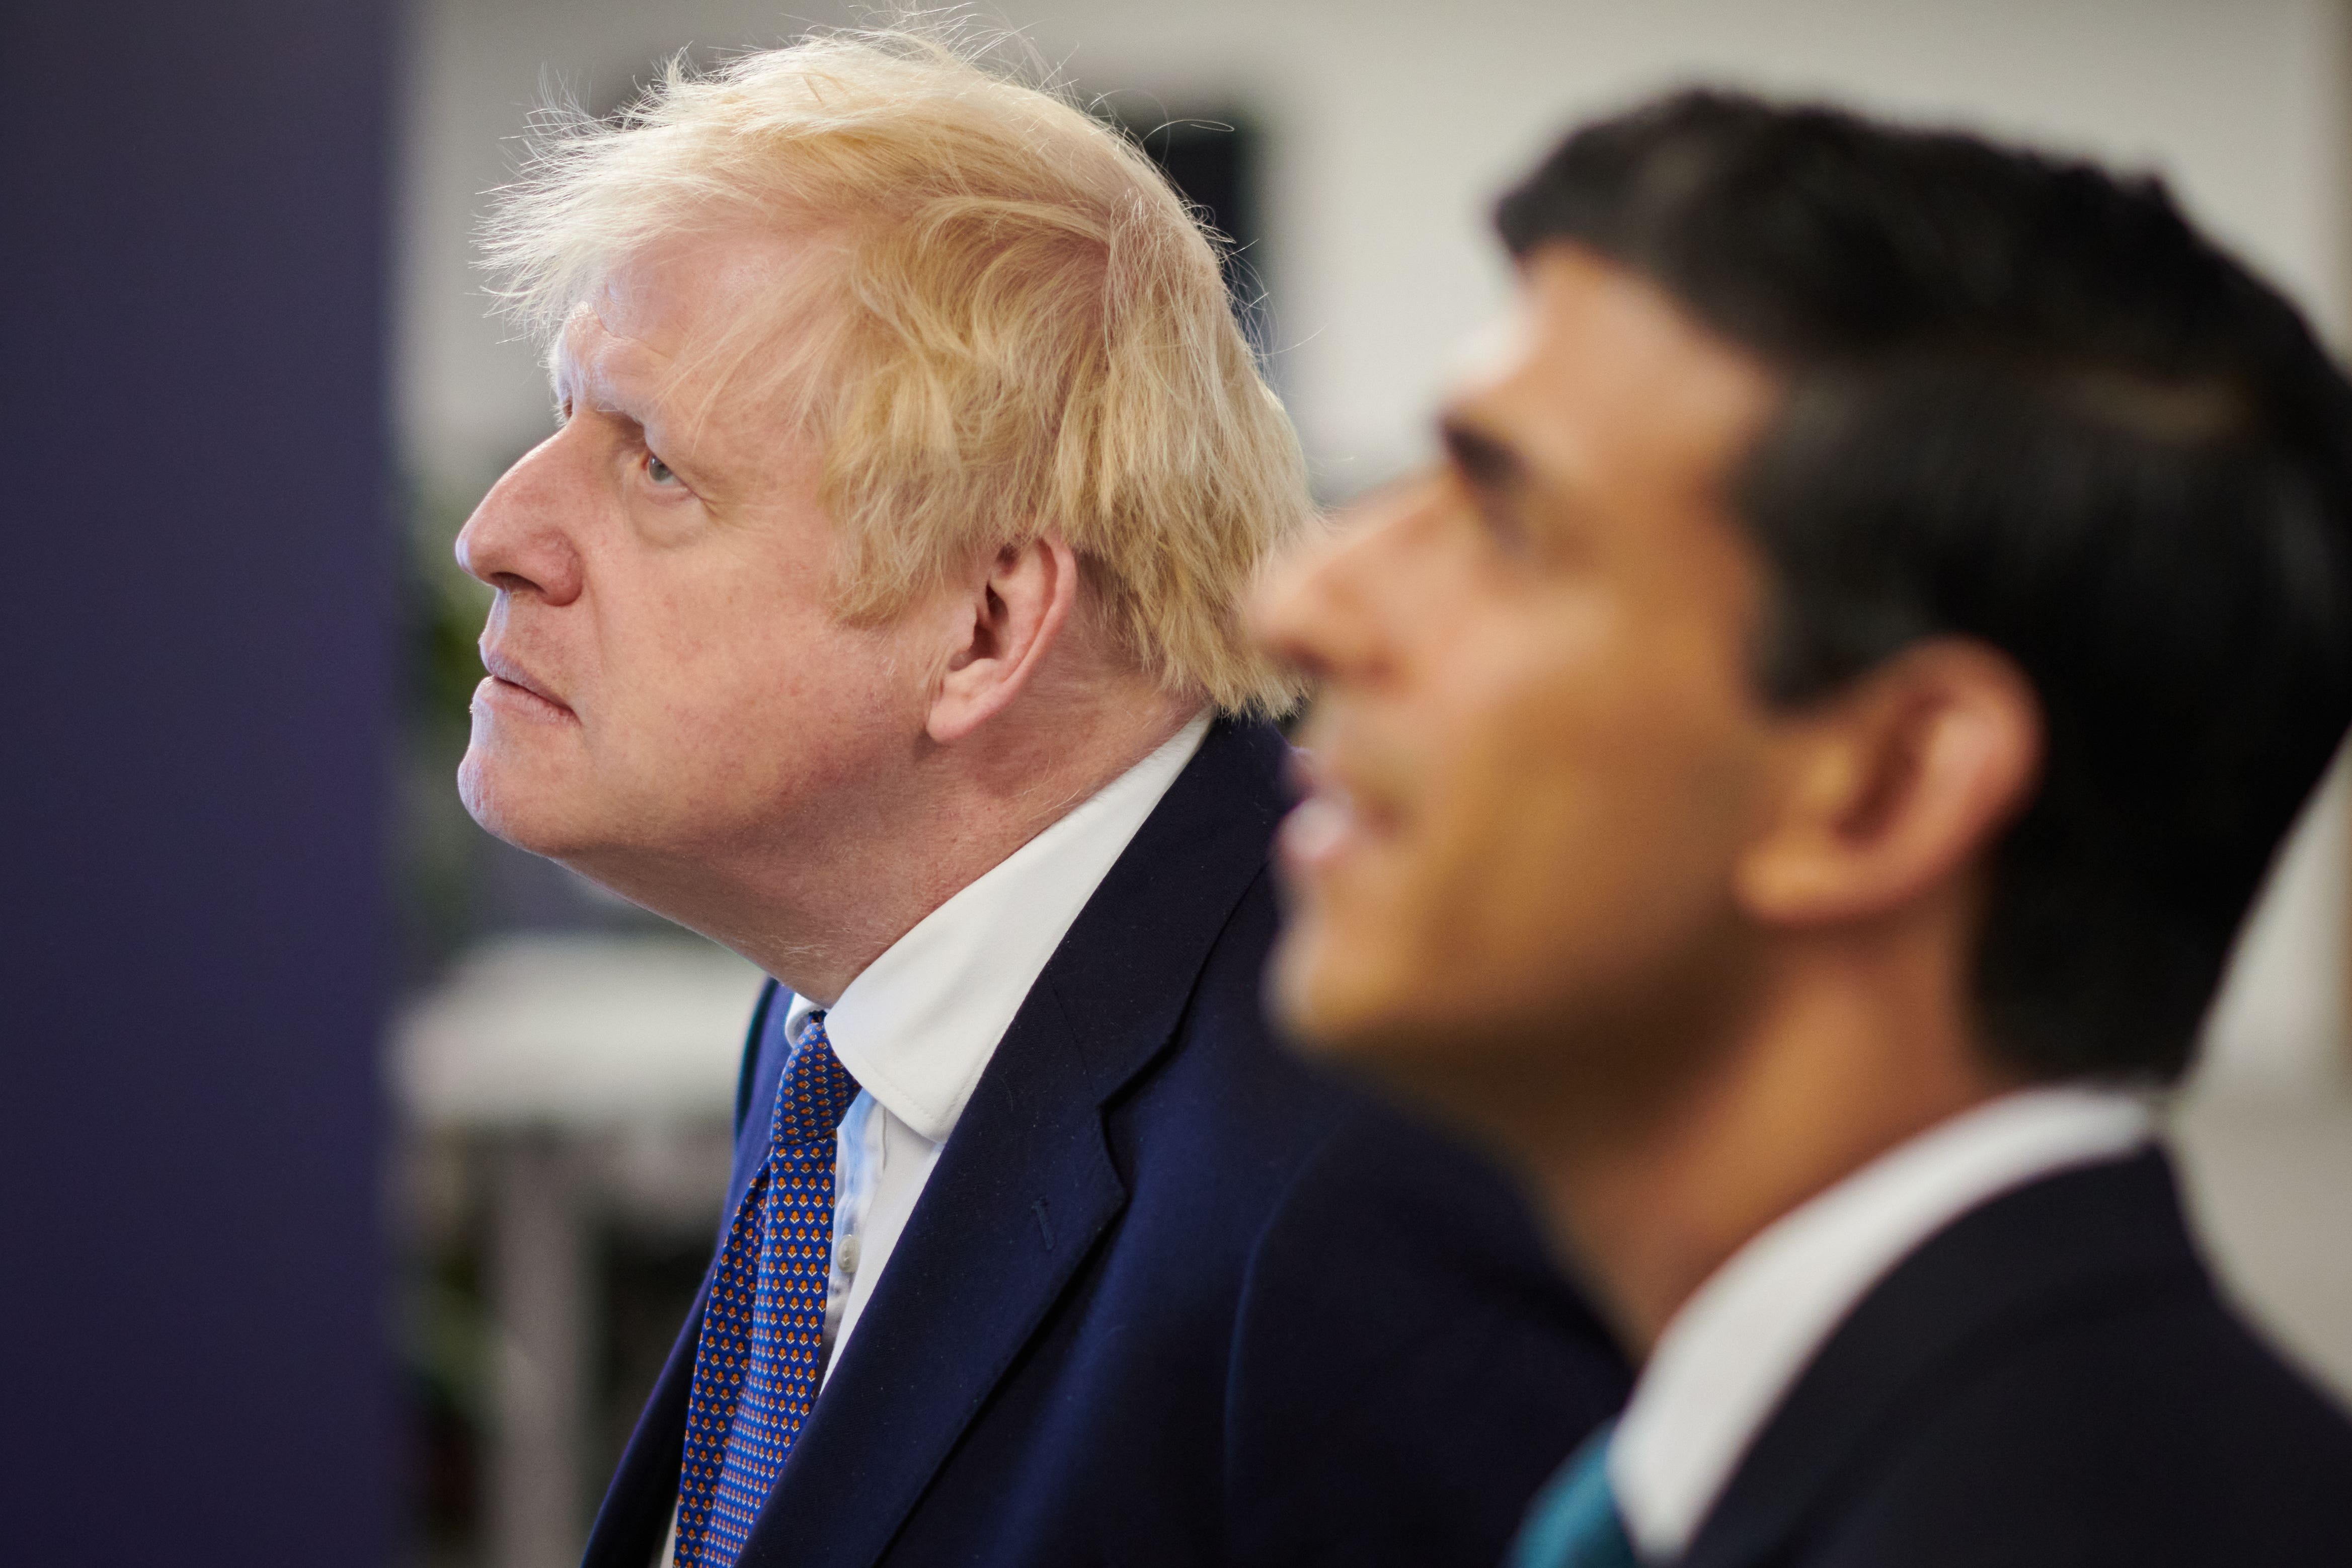 A cabinet minister said prime minister Rishi Sunak did not interfere with Boris Johnson’s peerage nominations